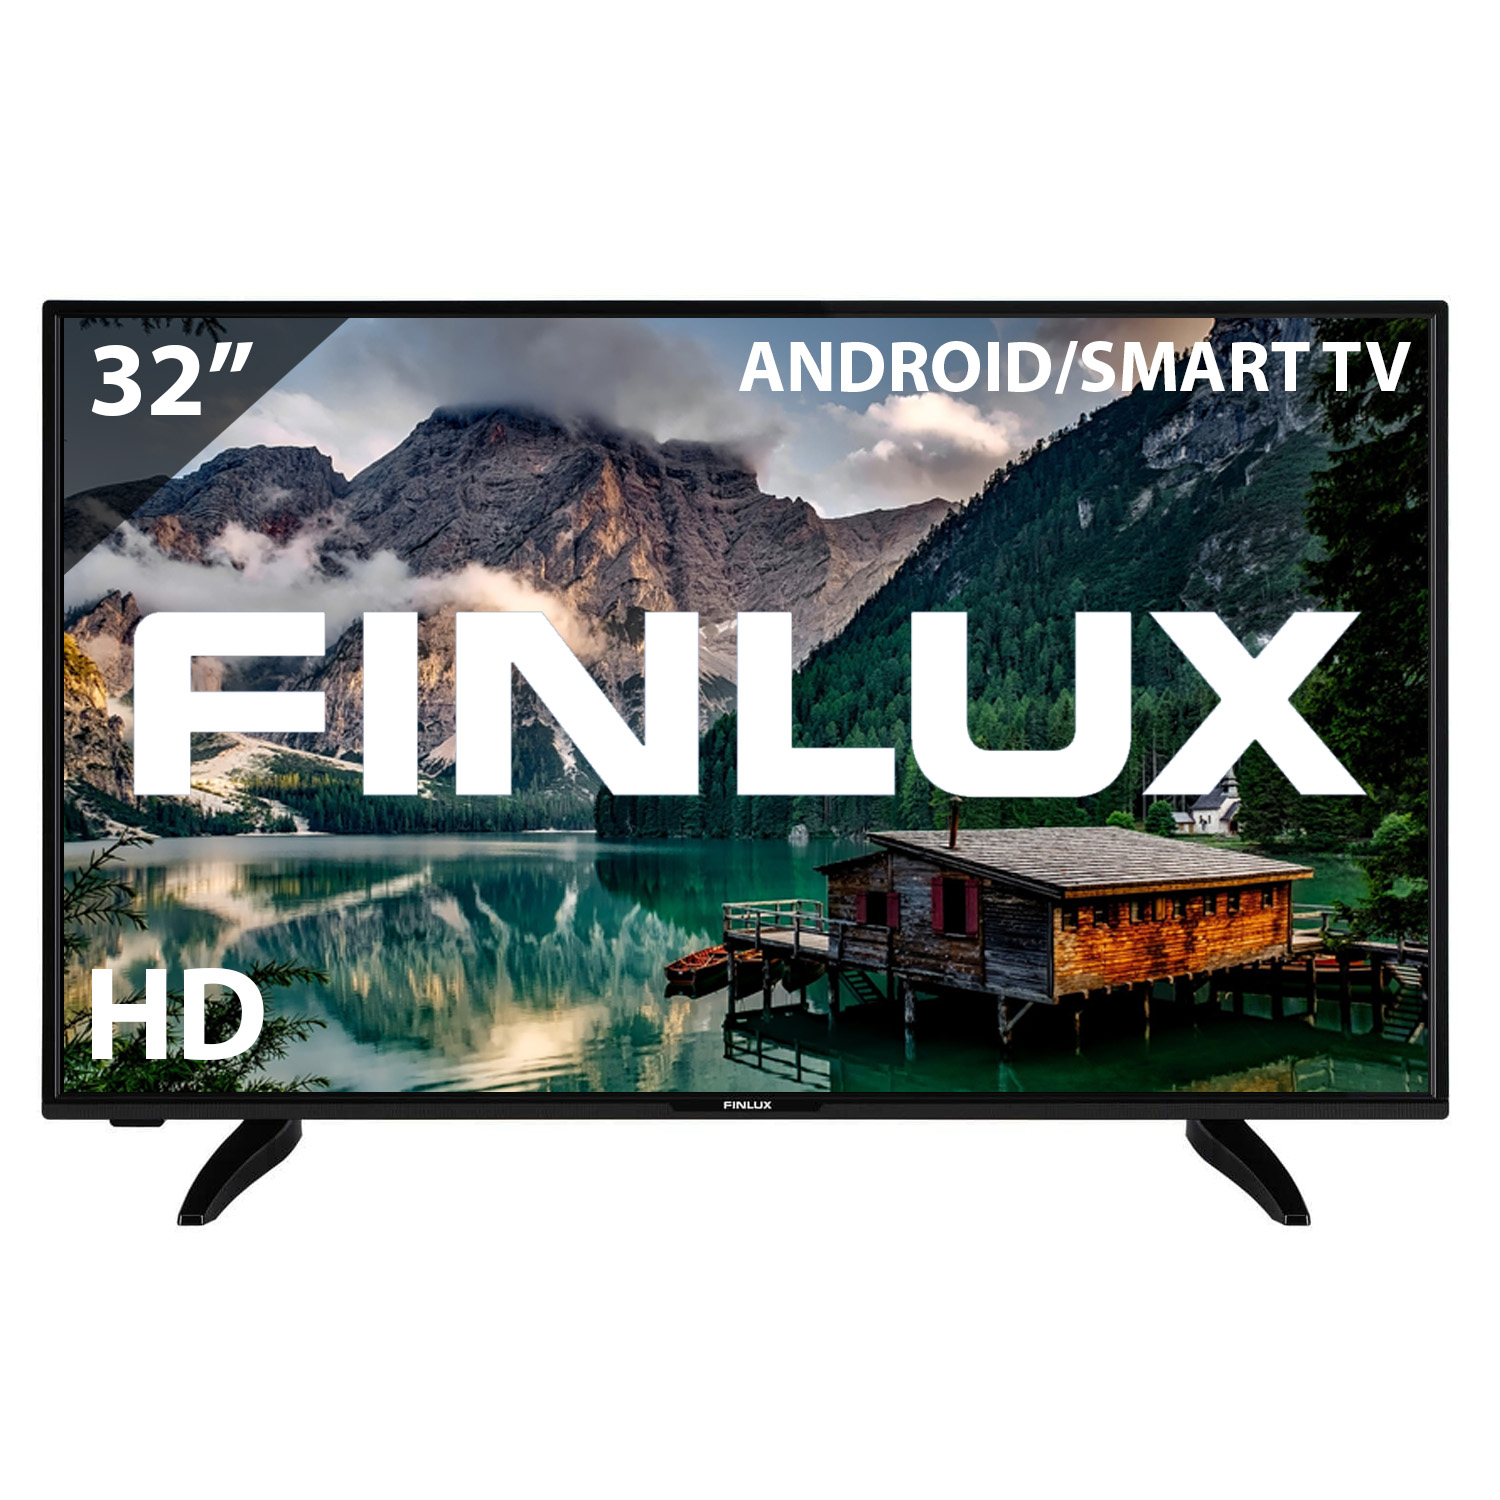 FINLUX 32” HD ANDROID SMART TV 32-FHA-6230